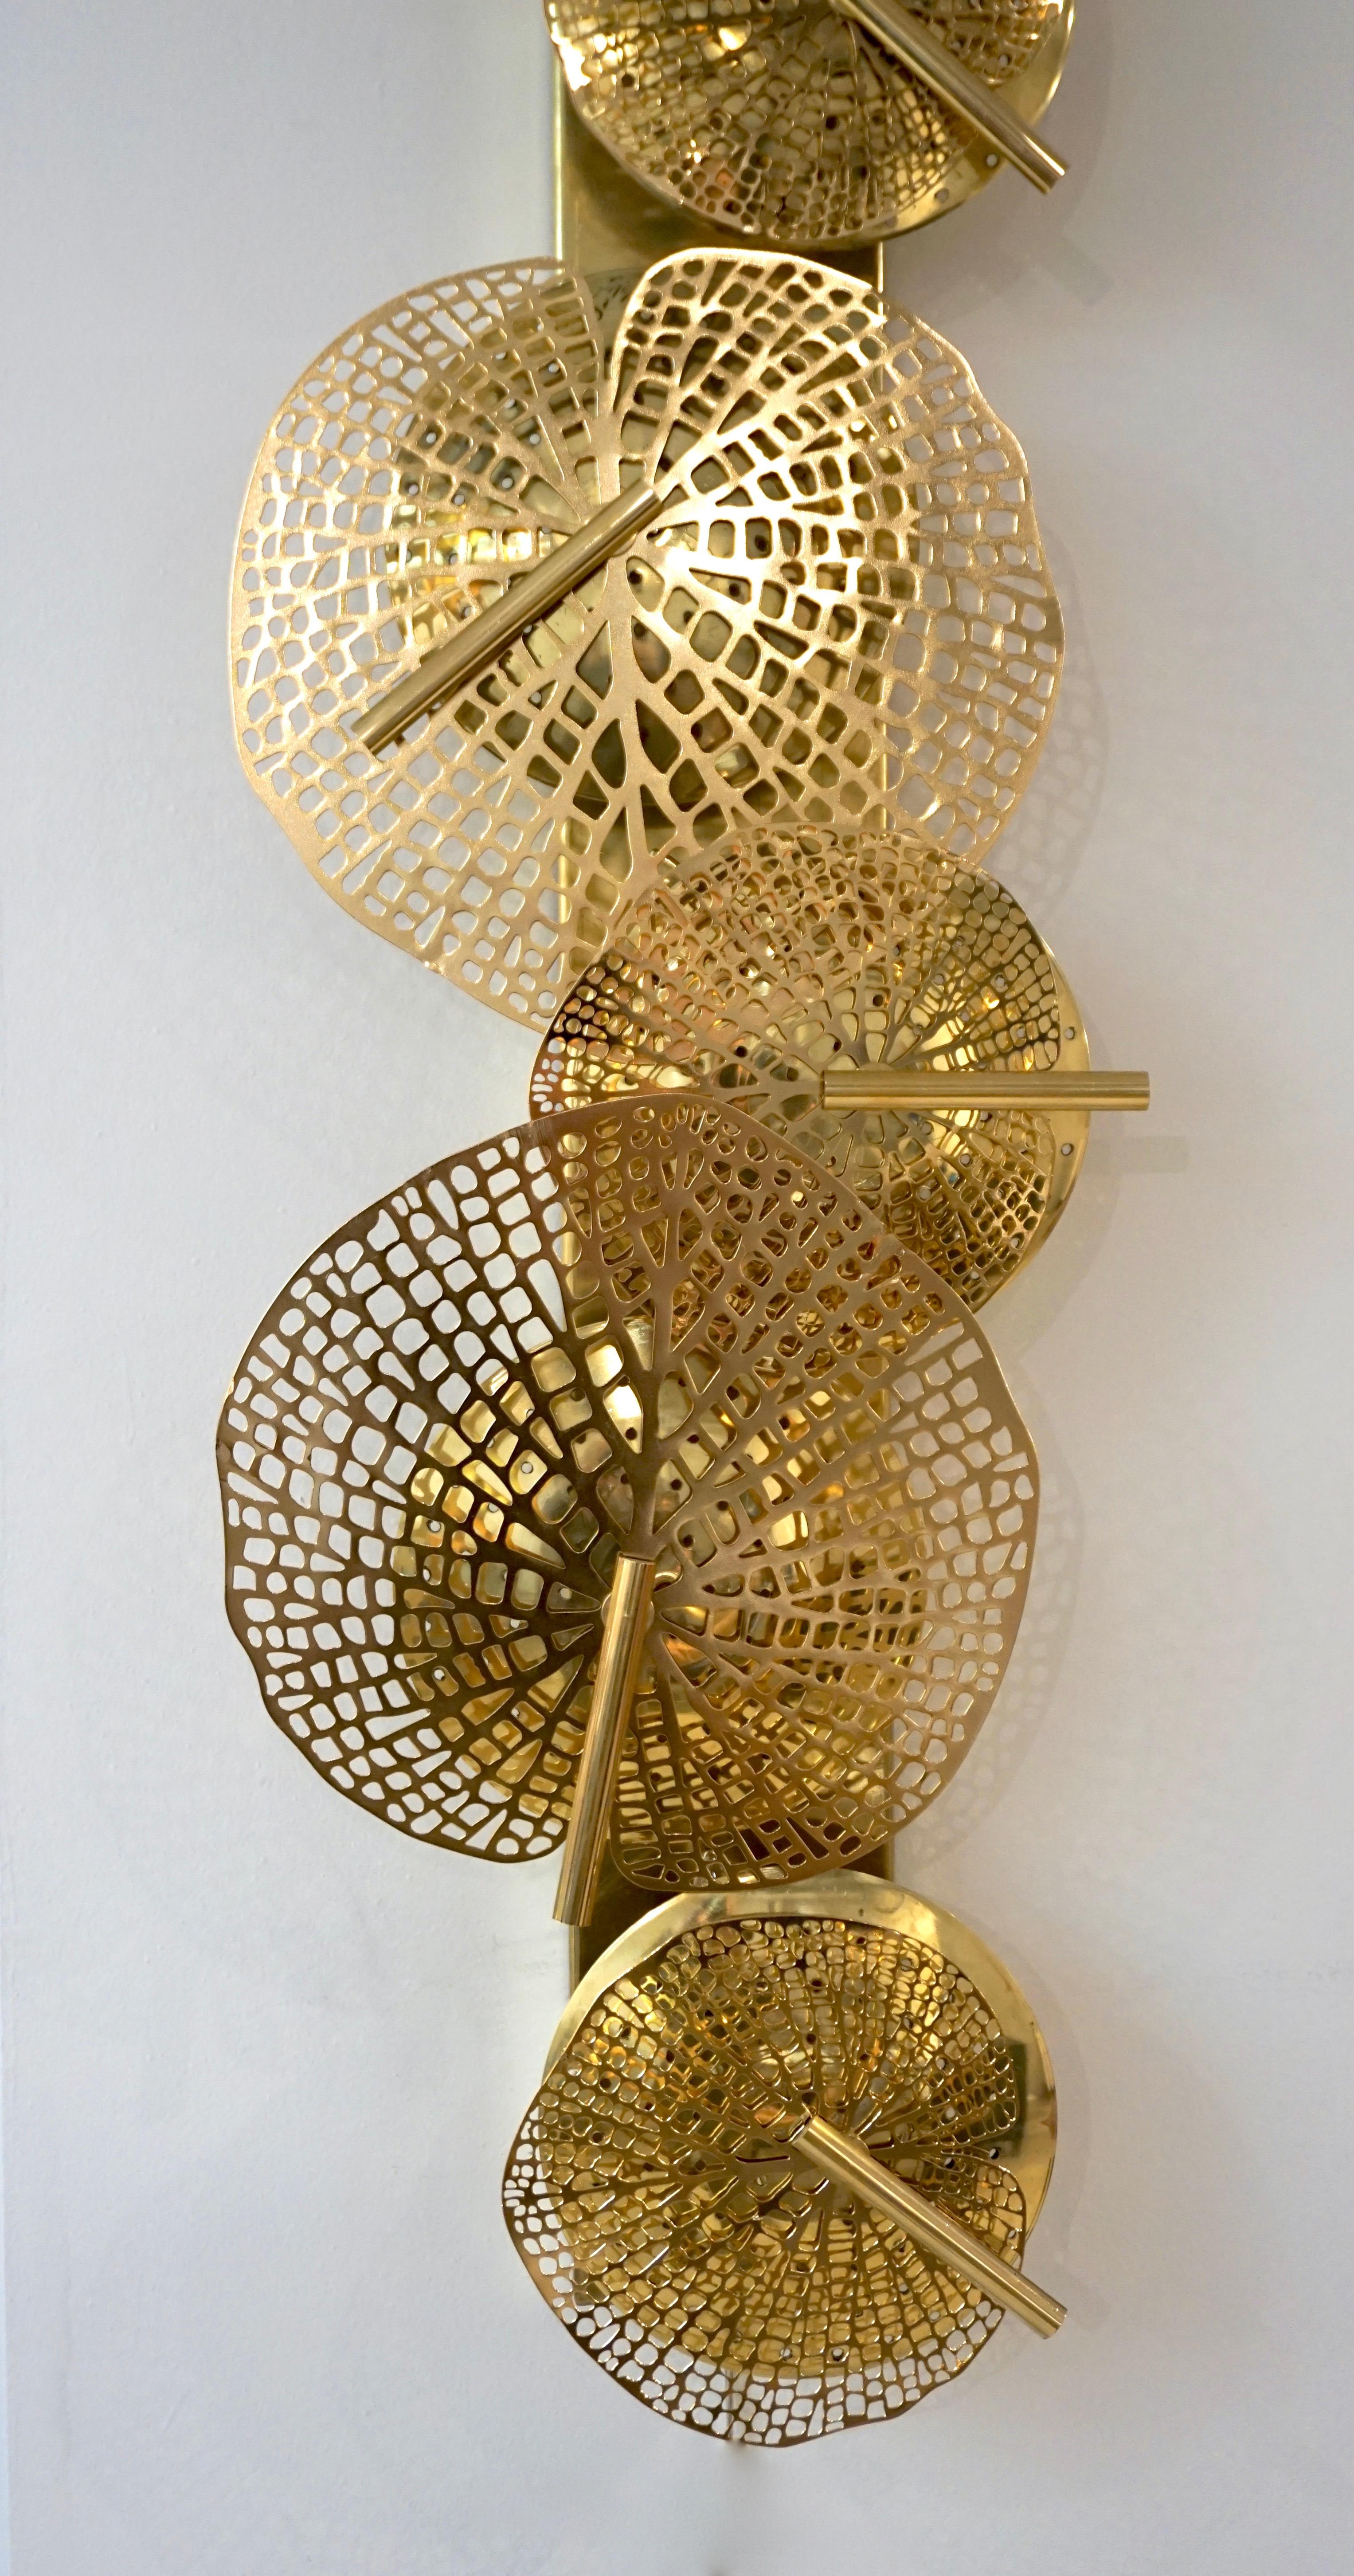 Contemporary Organic Italian Art Design Pair of Perforated Brass Leaf Sconces For Sale 4